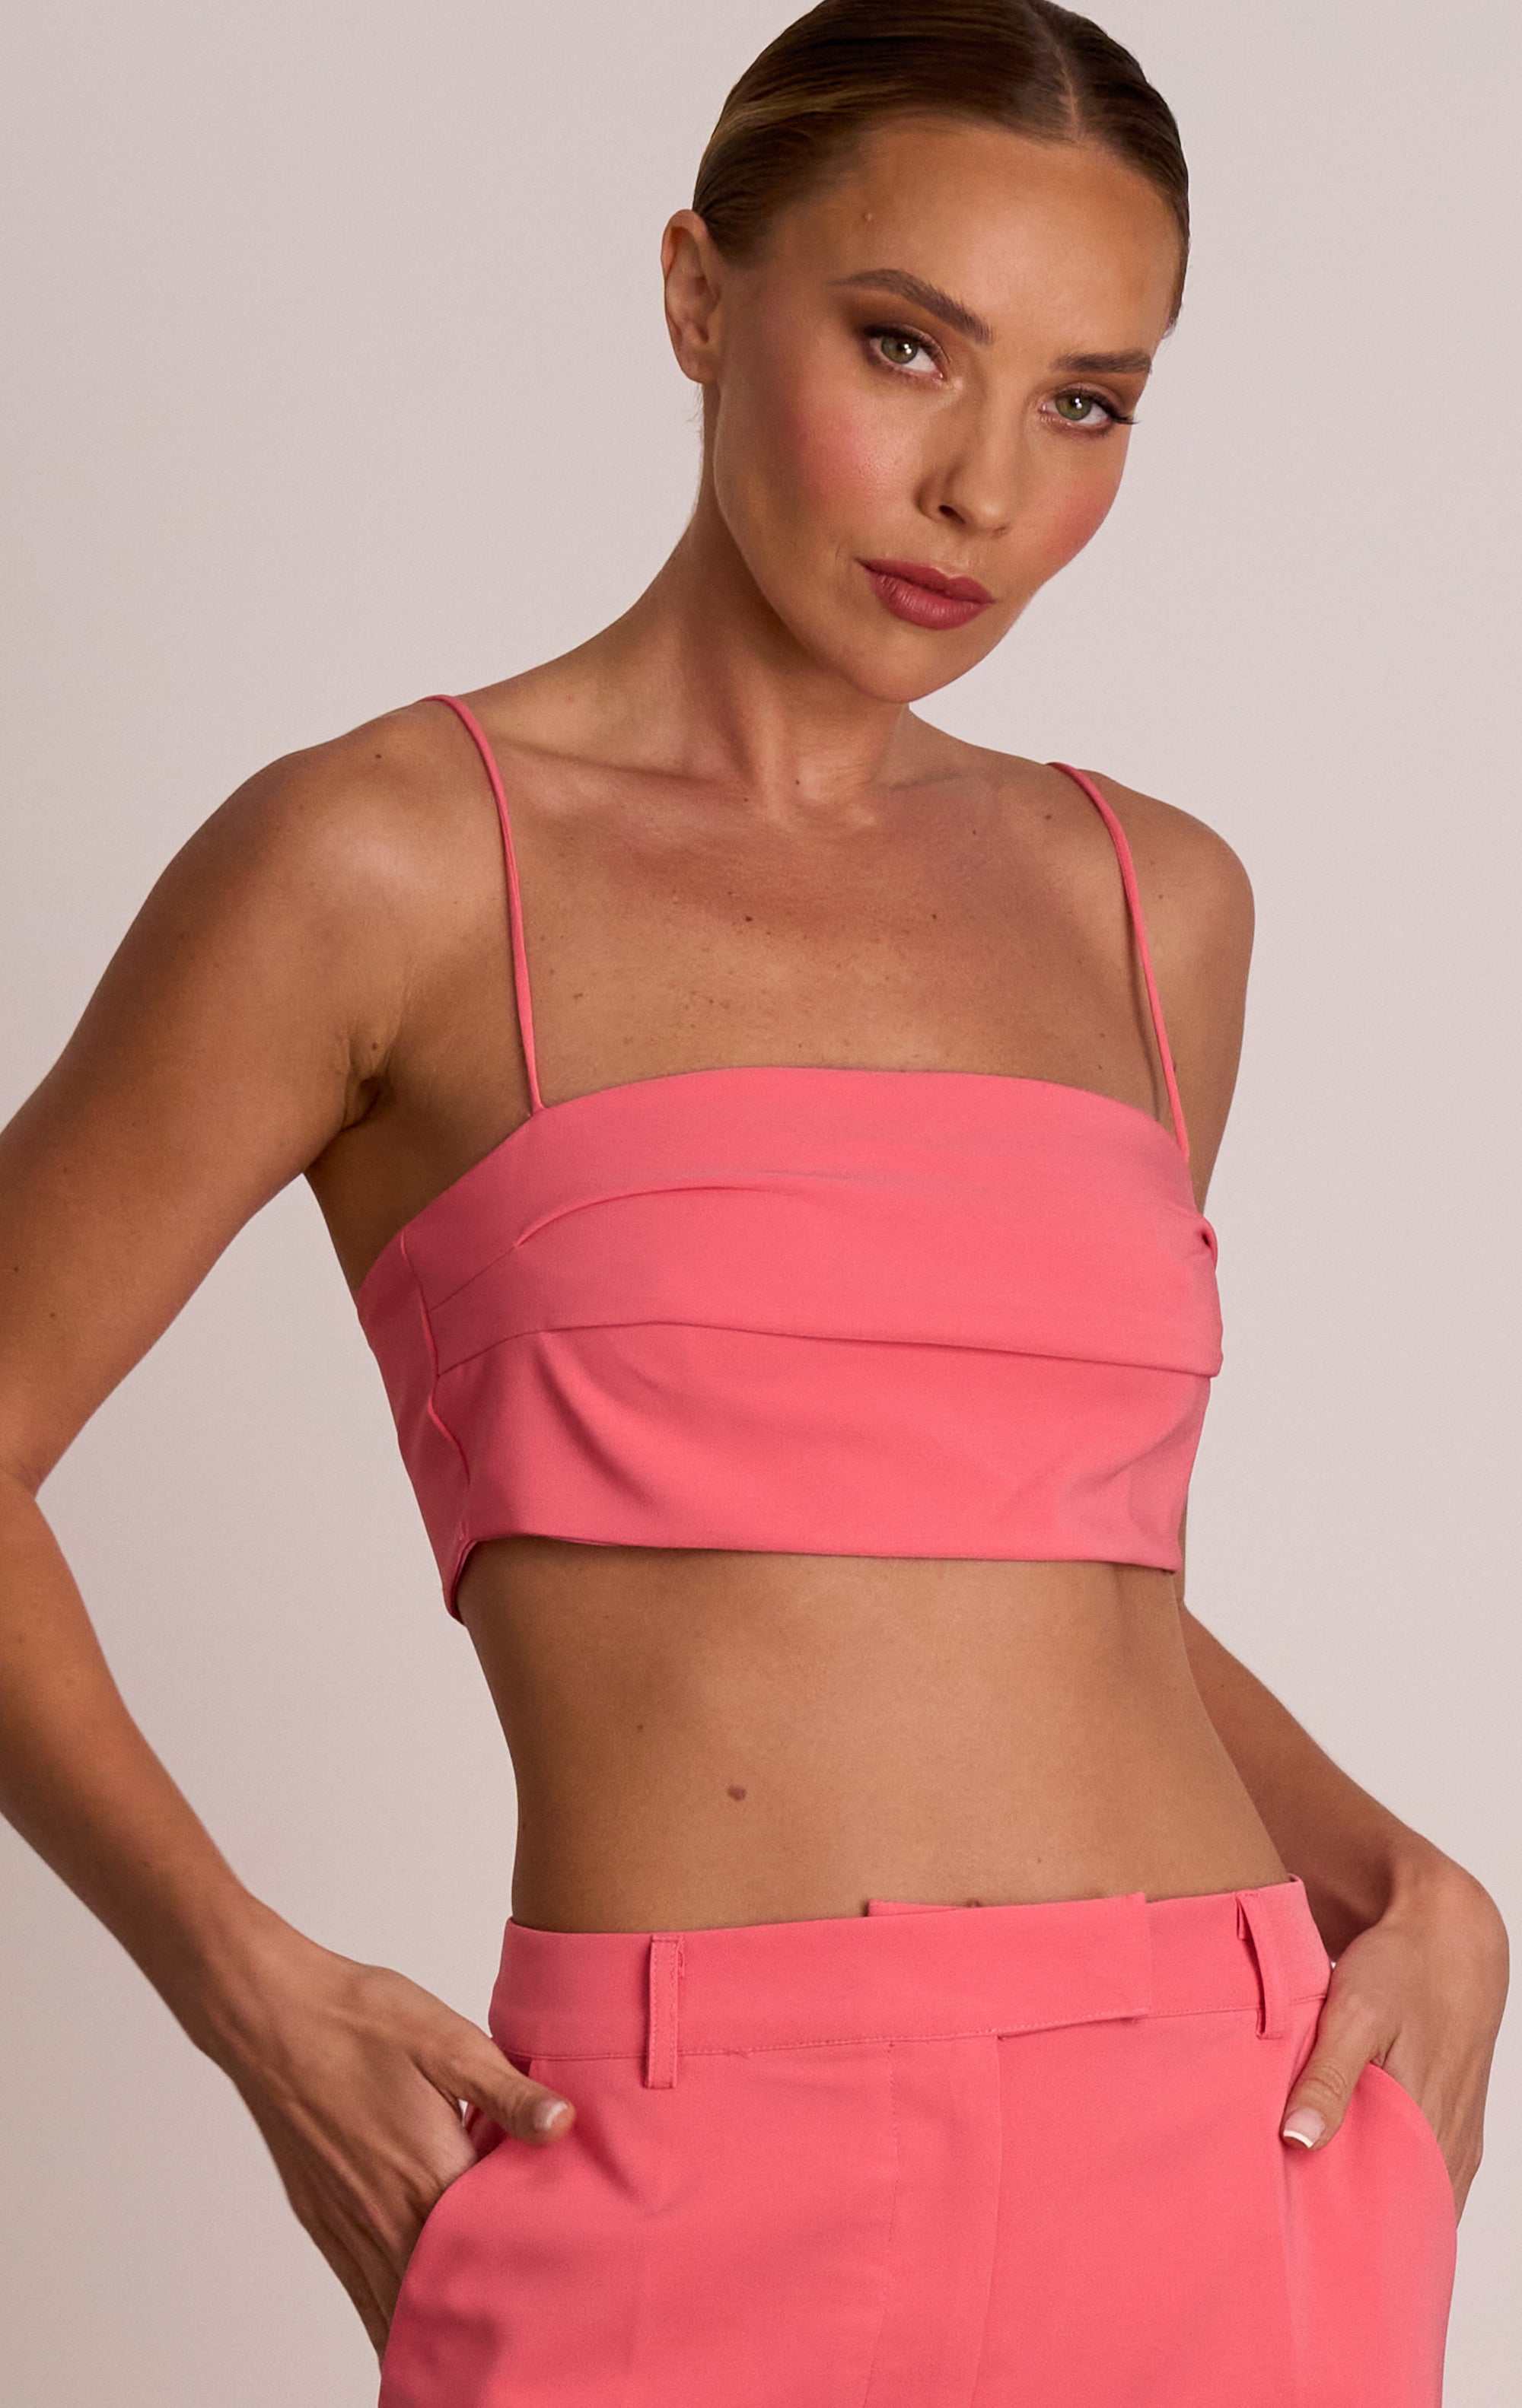 Ace Bodice - TAKE 40% OFF DISCOUNT APPLIED AT CHECKOUT